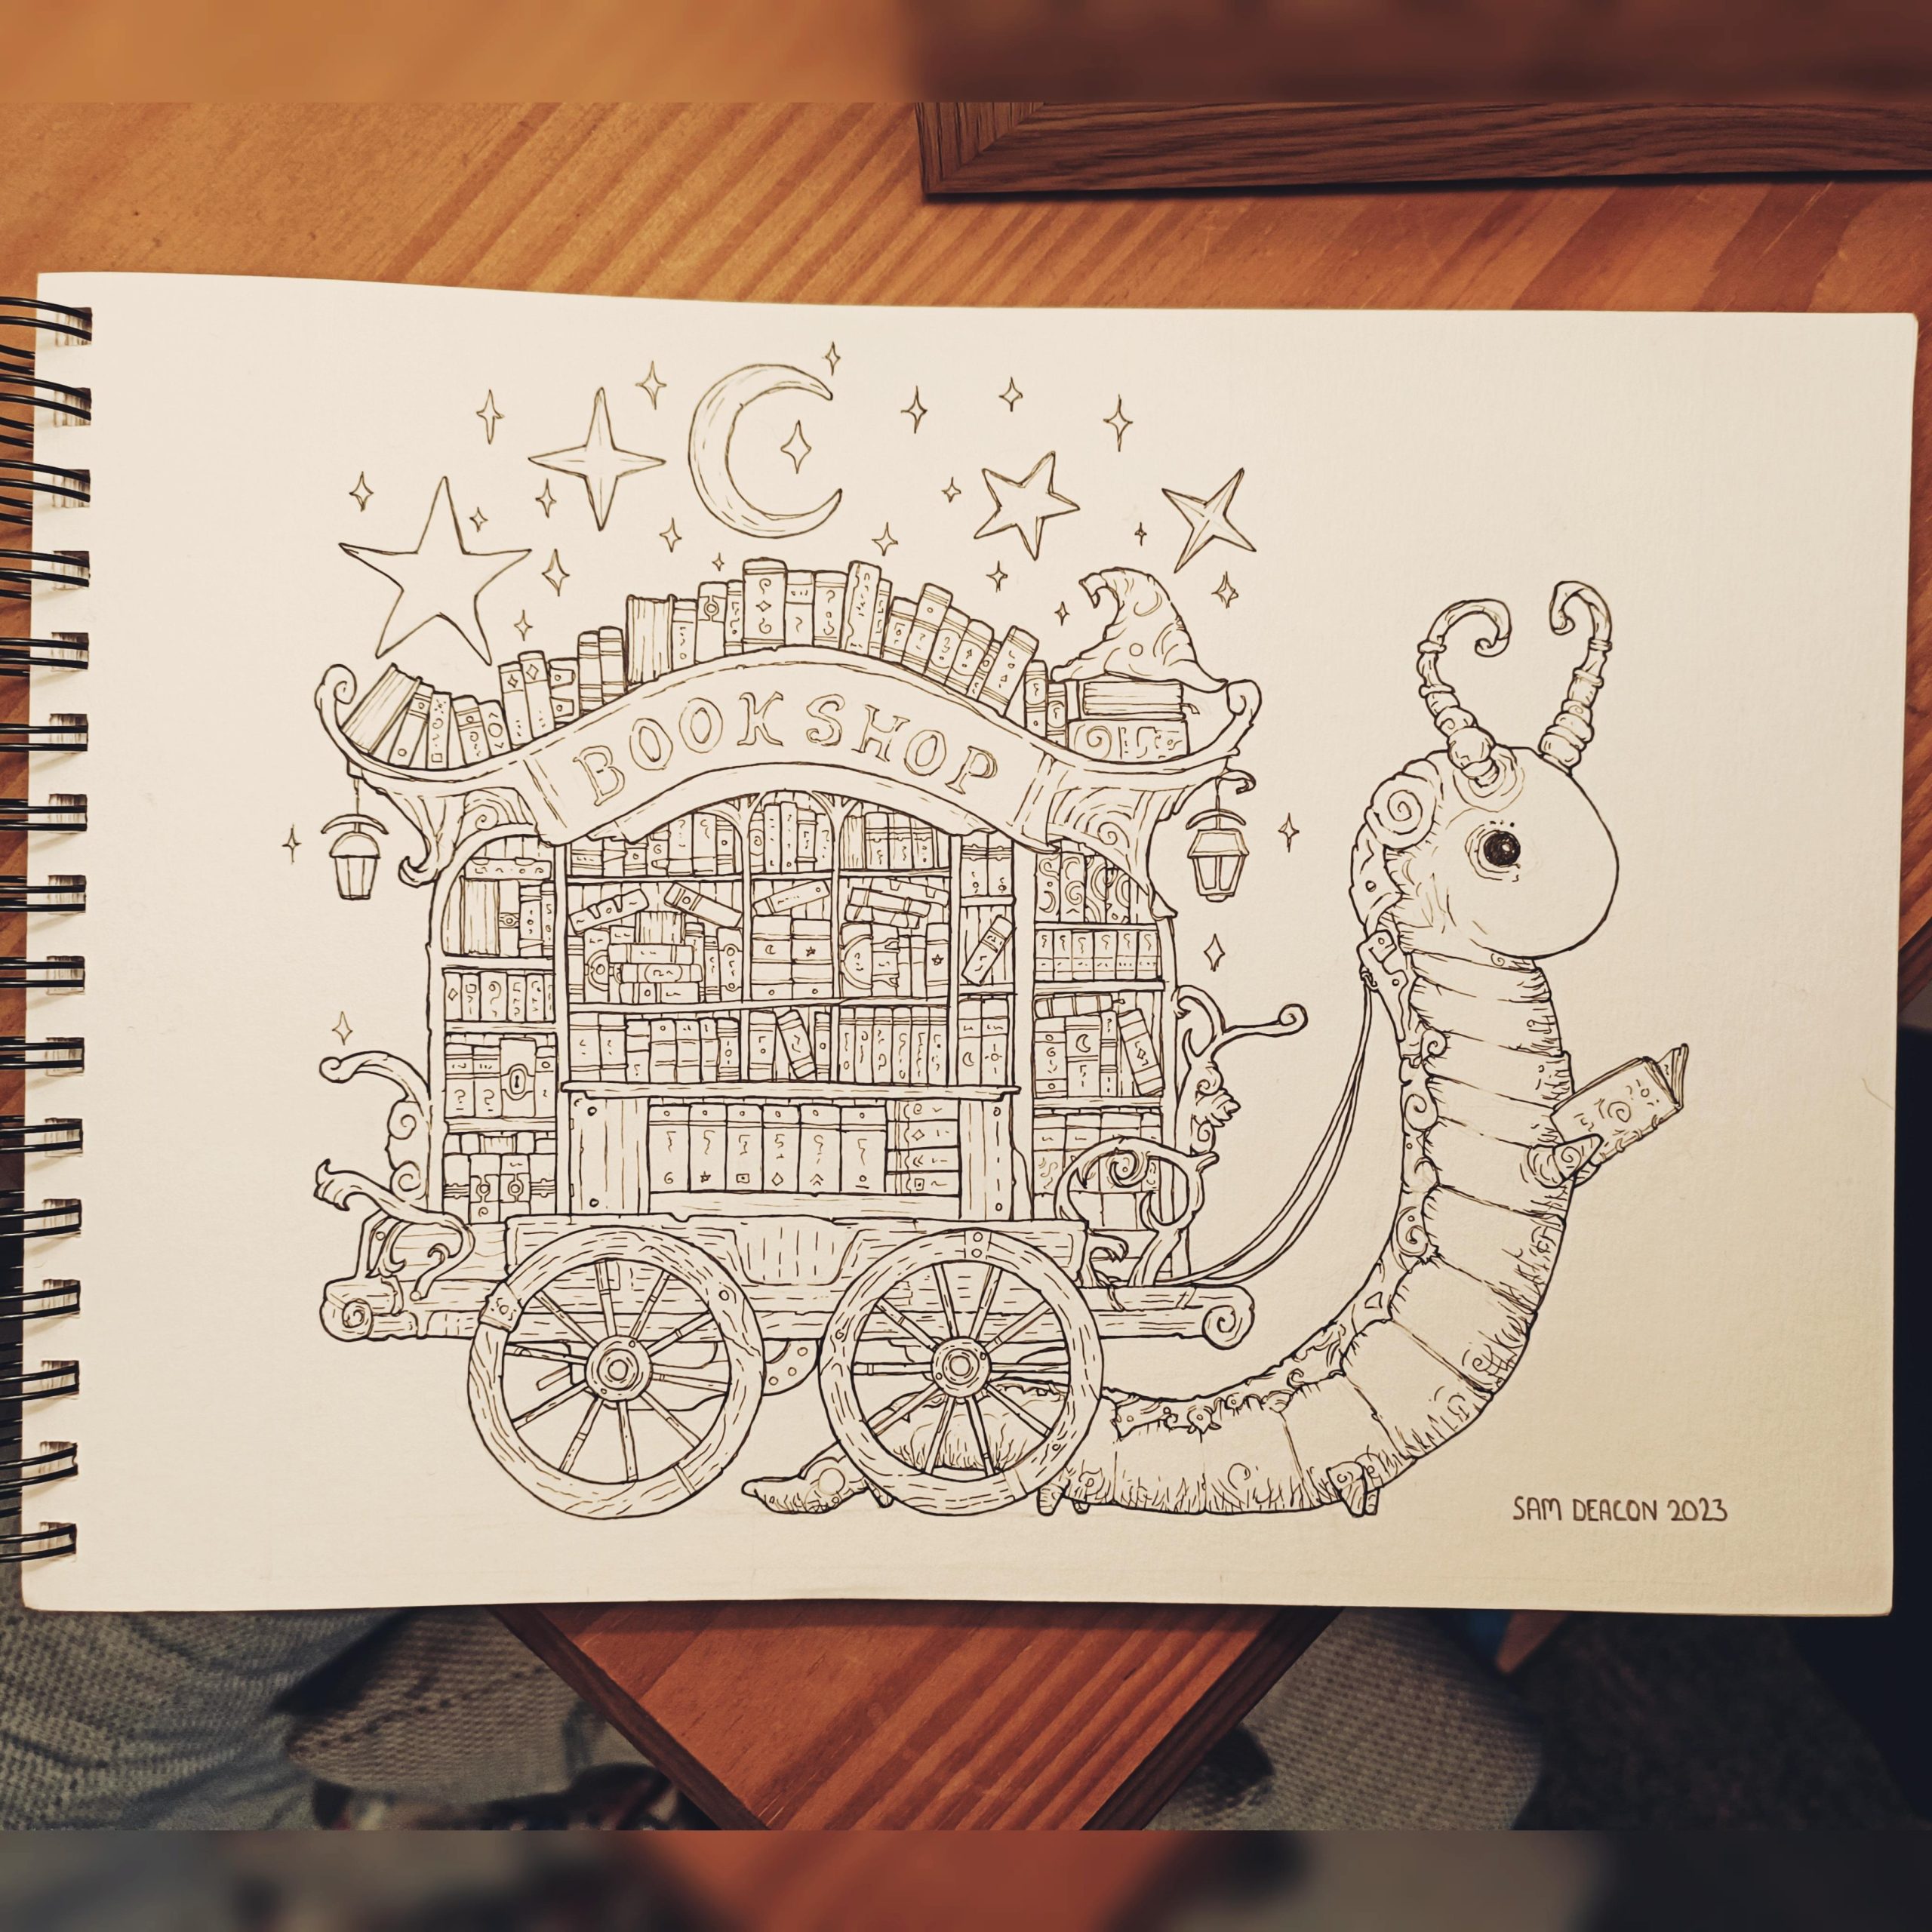 My drawing of a bookworm